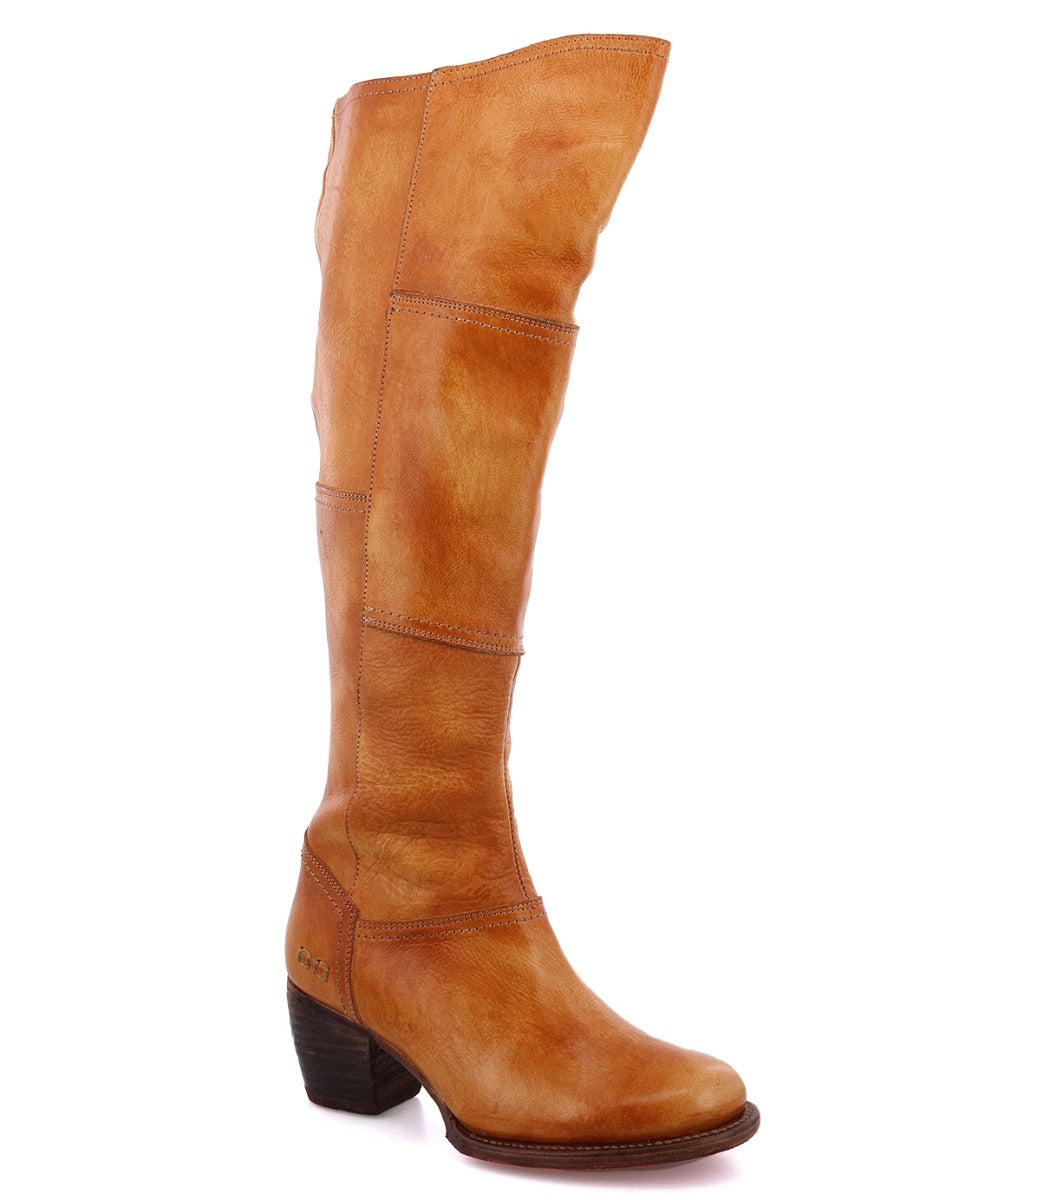 A women's Kennice pecan leather boot by Bed Stu.